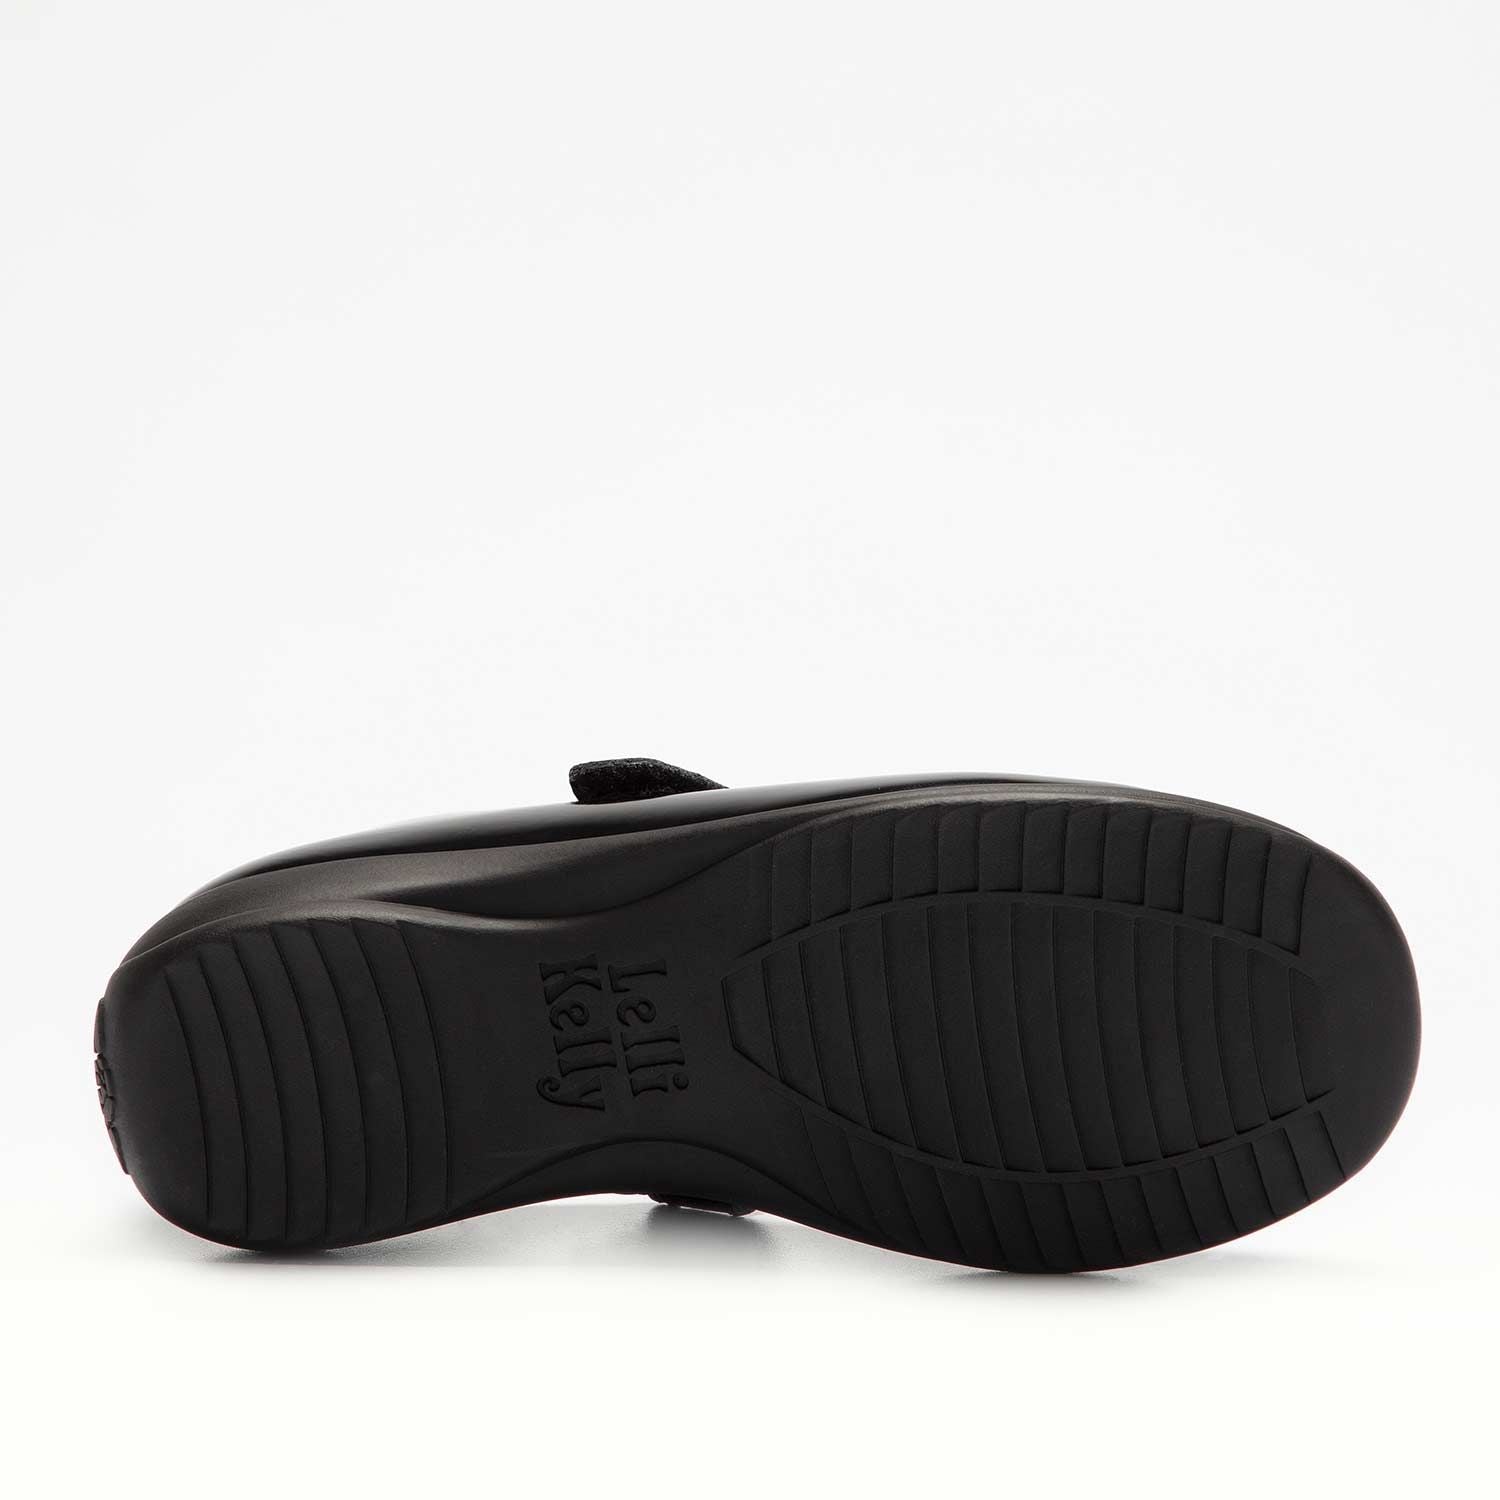 A girls Mary jane school shoe by Lelli Kelly, style Bella 2 in, black patent with velcro fastening. Sole view.